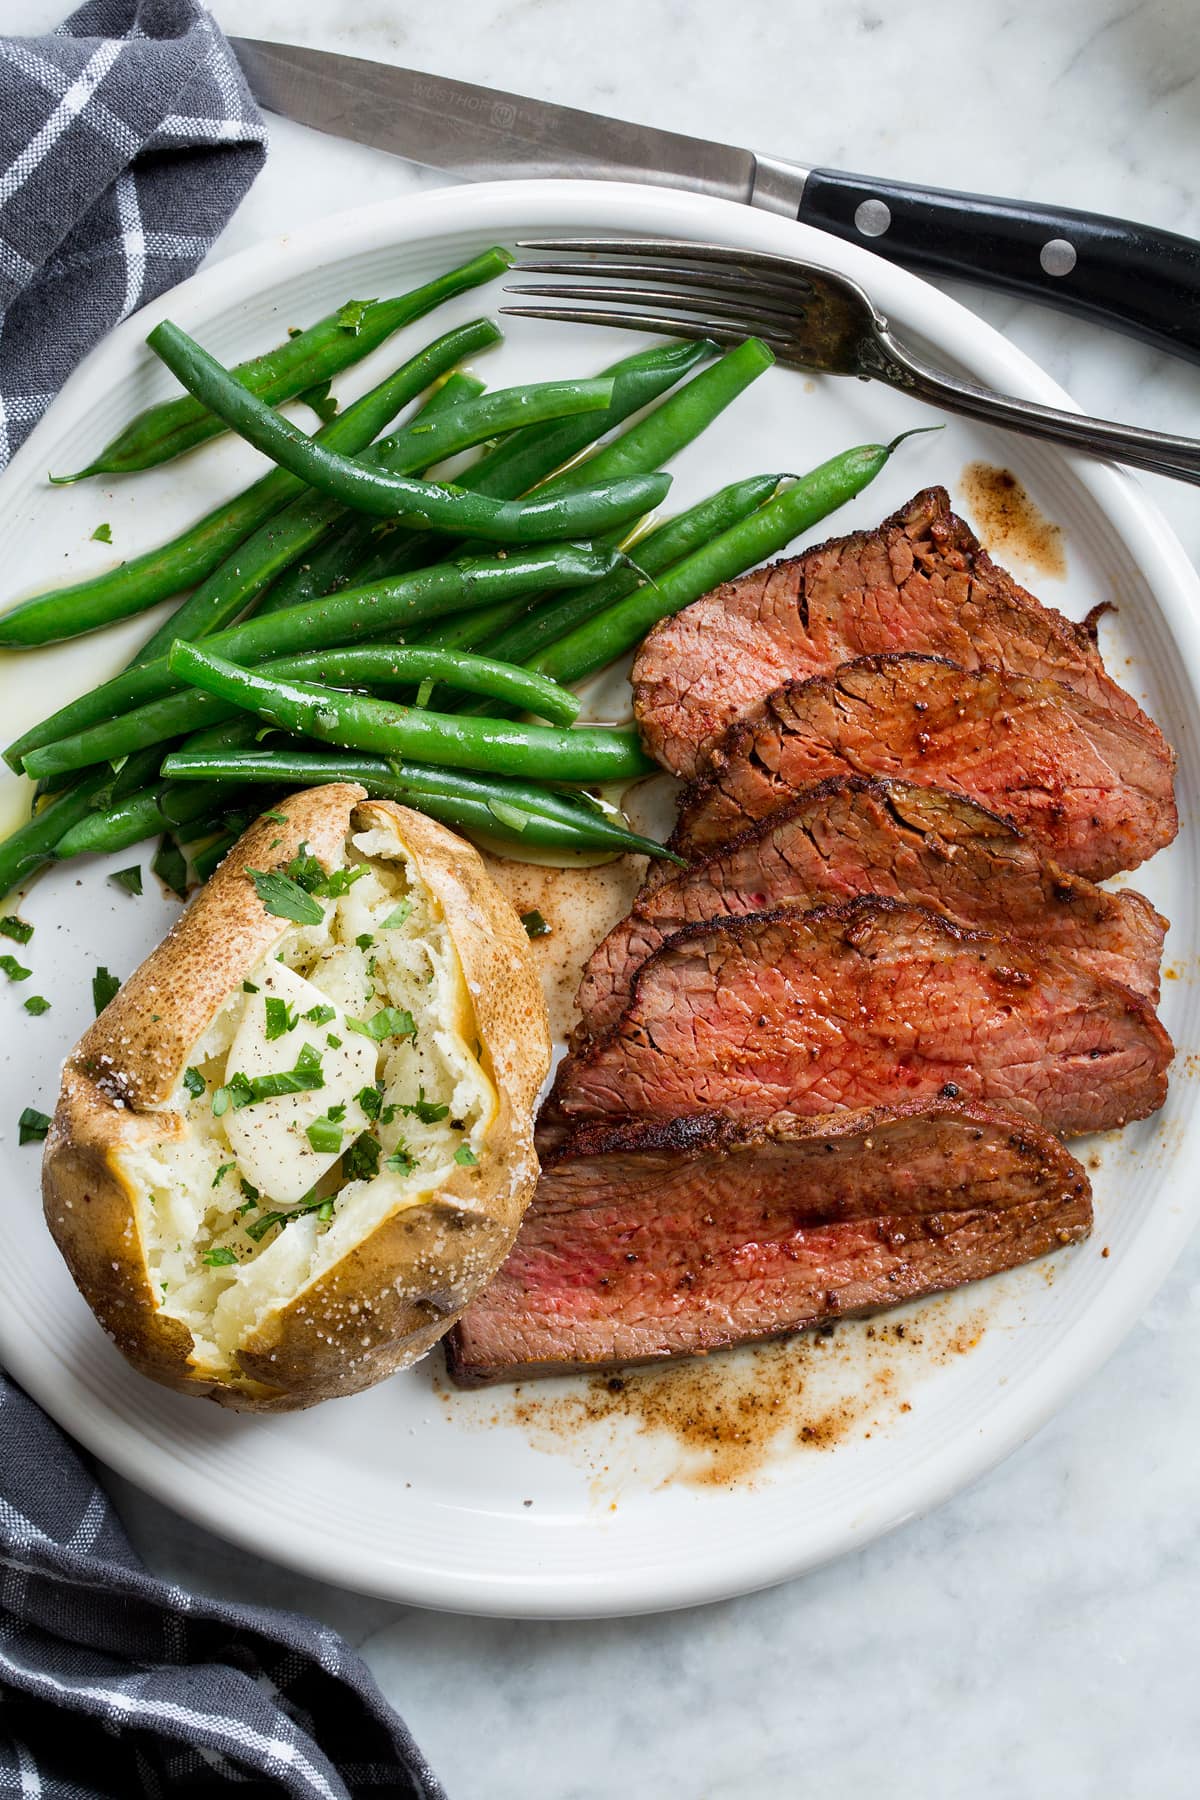 Roasted tri tip on a white plate shown with serving suggestion of baked potato and steamed green beans.